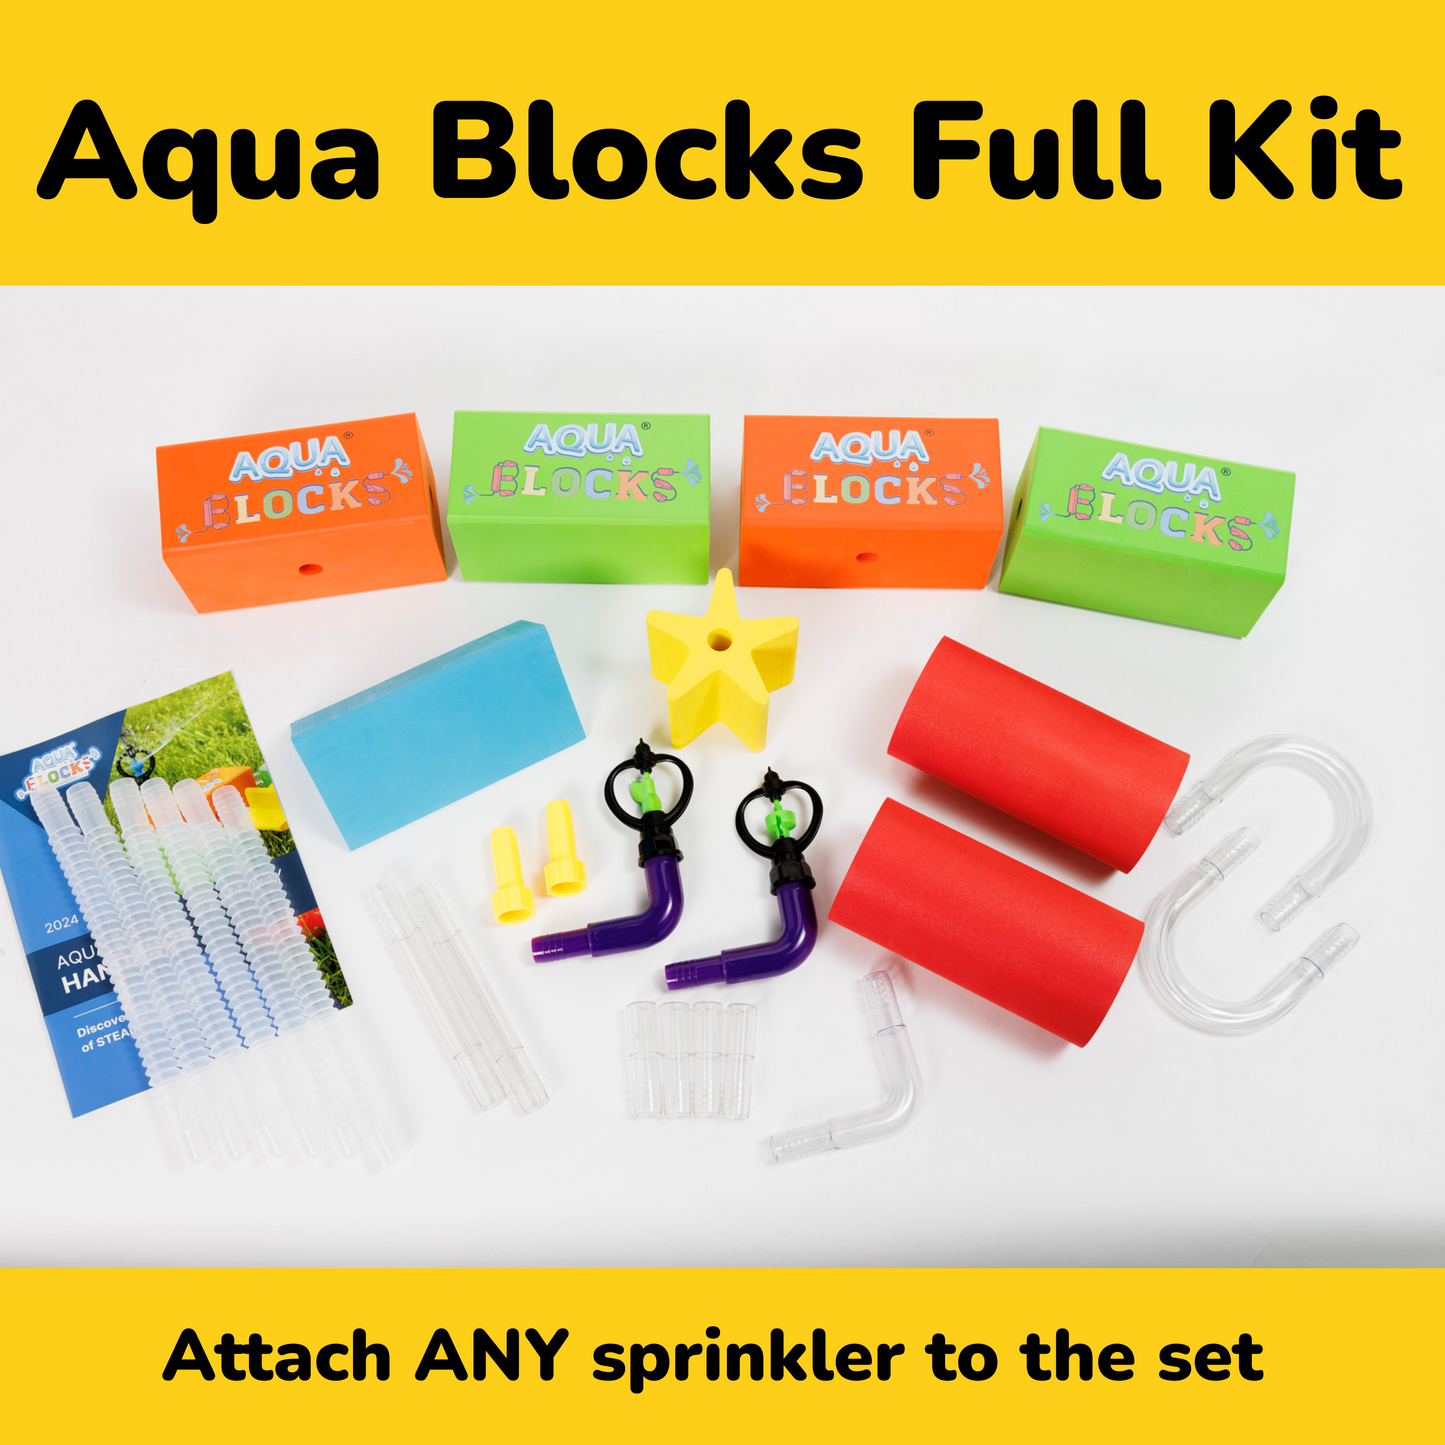 Aqua Blocks Innovative STEAM Water Toy for Outdoors, Ideal as Birthday Gift for Boys and Girls